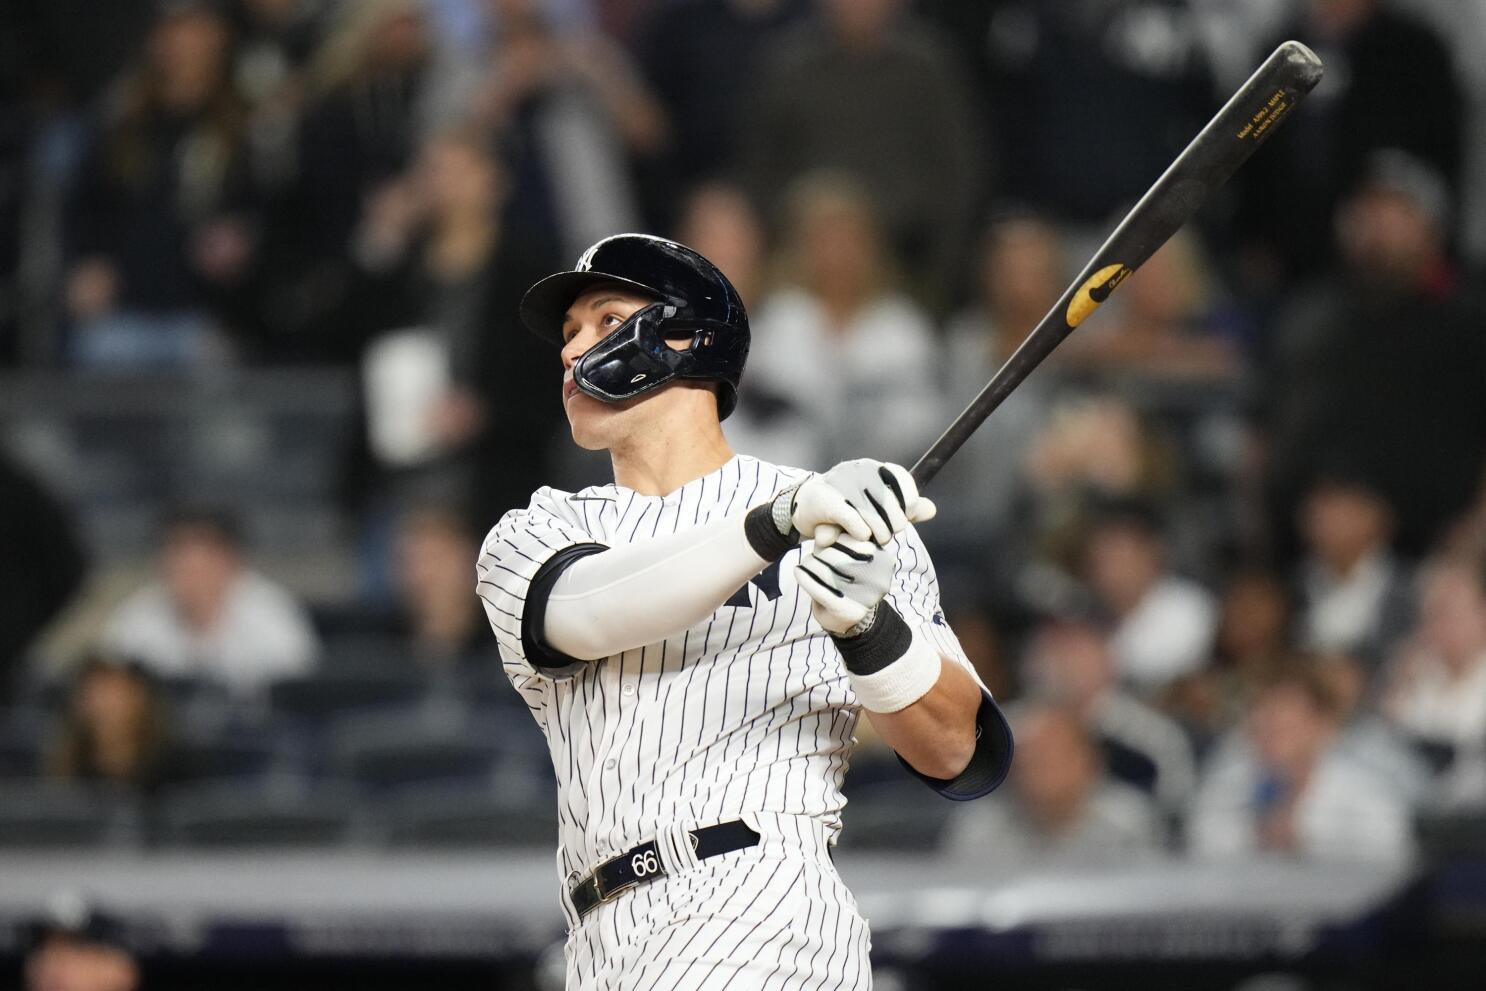 Judge hits tying HR in 9th, Volpe wins it in 10th as Yankees rally past  Orioles 6-5